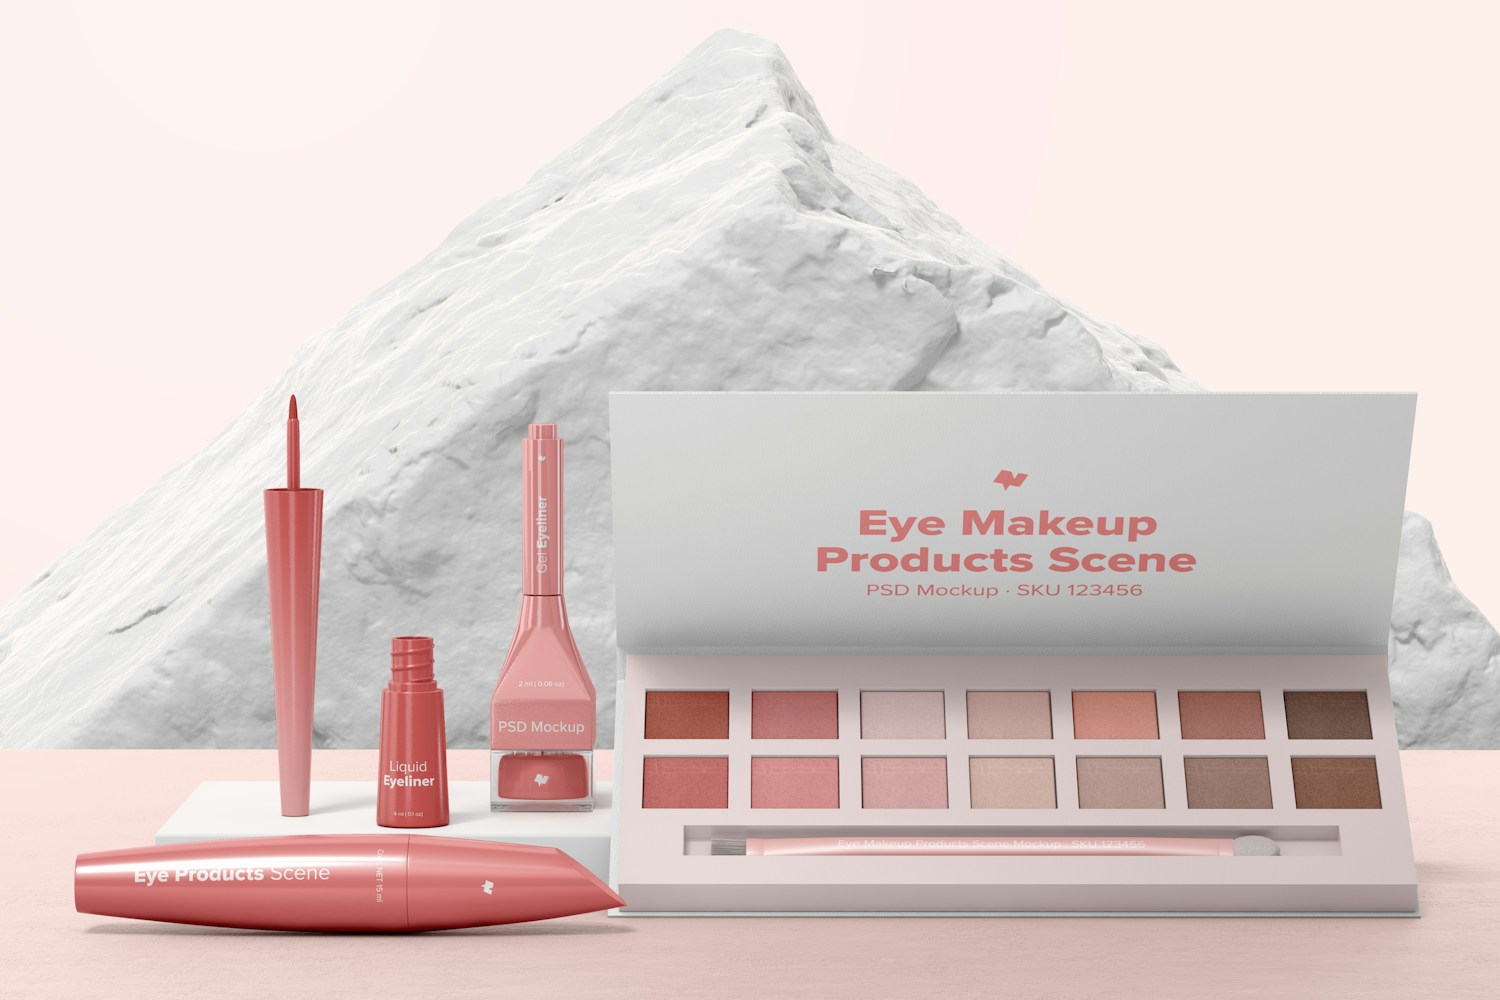 Eye Makeup Products Scene Mockup, Front View 02